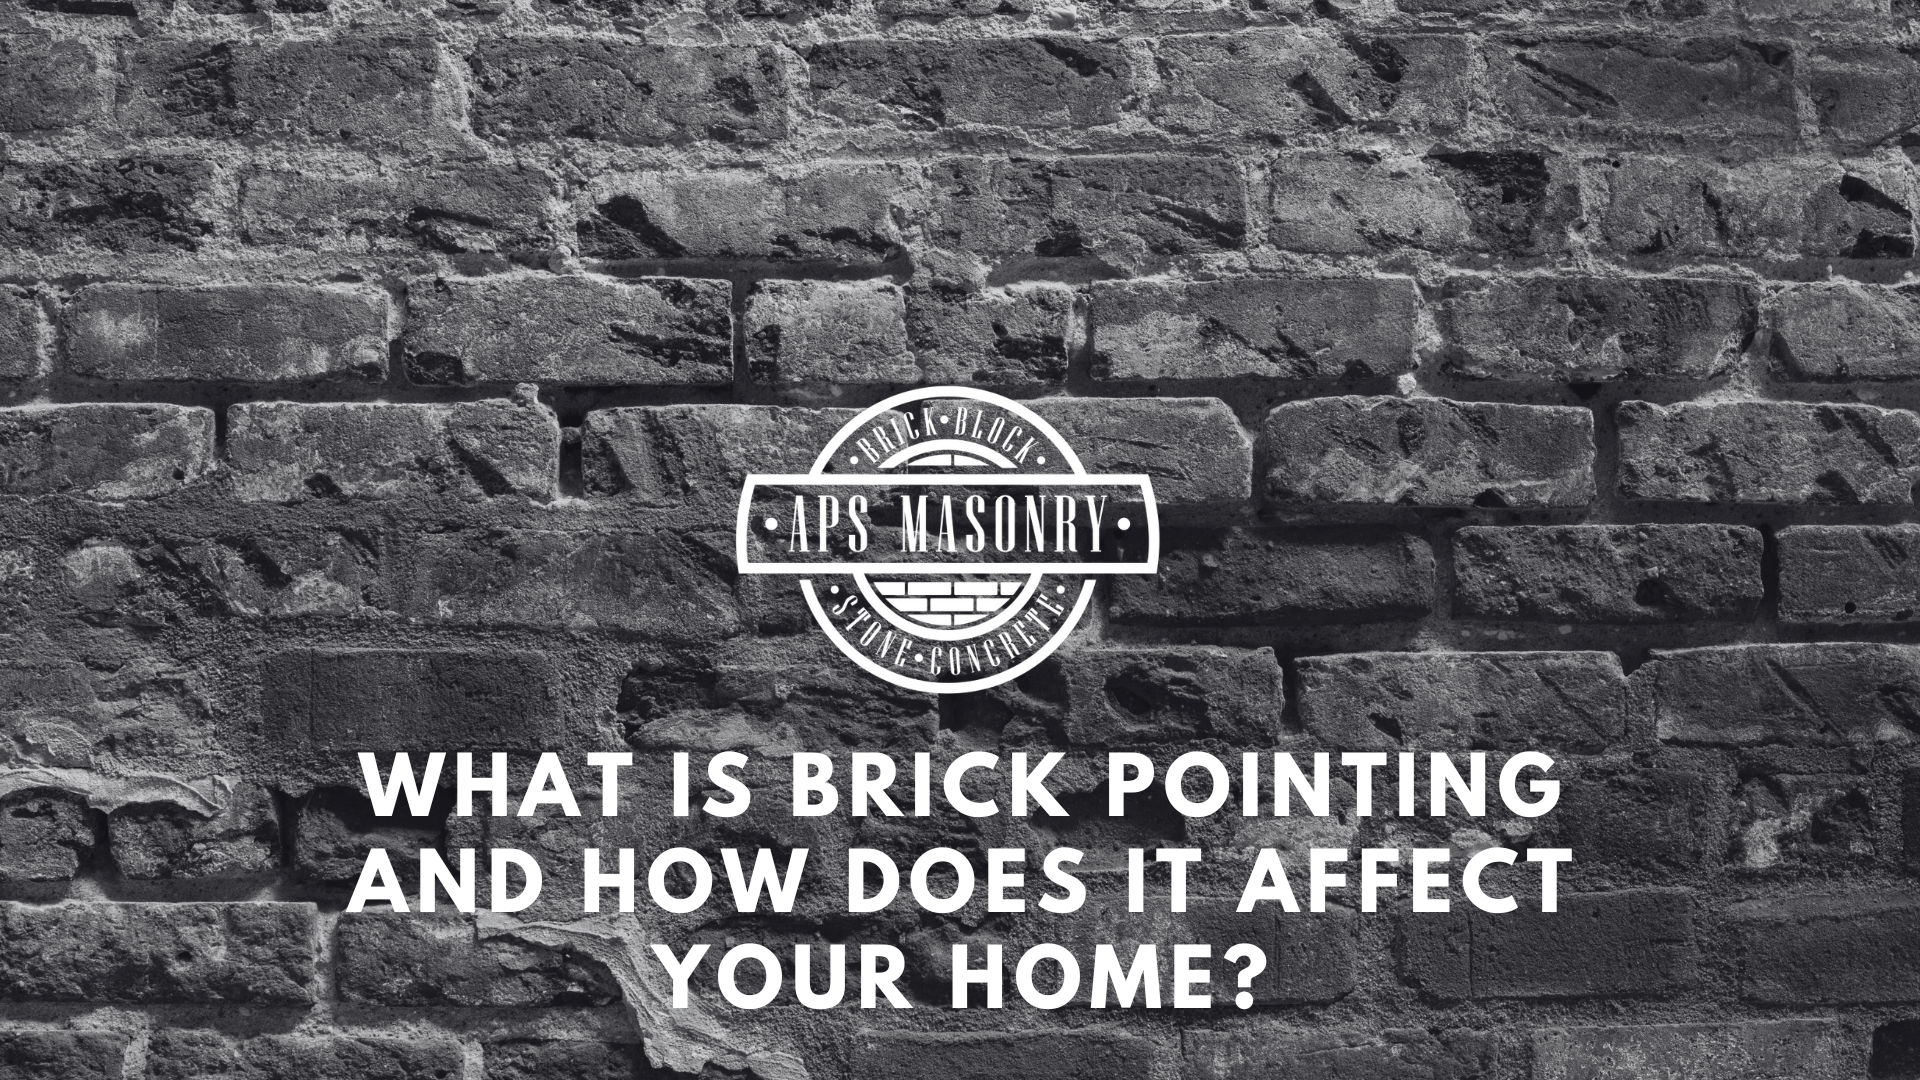 What Is Brick Pointing and How Does It Affect Your Home?